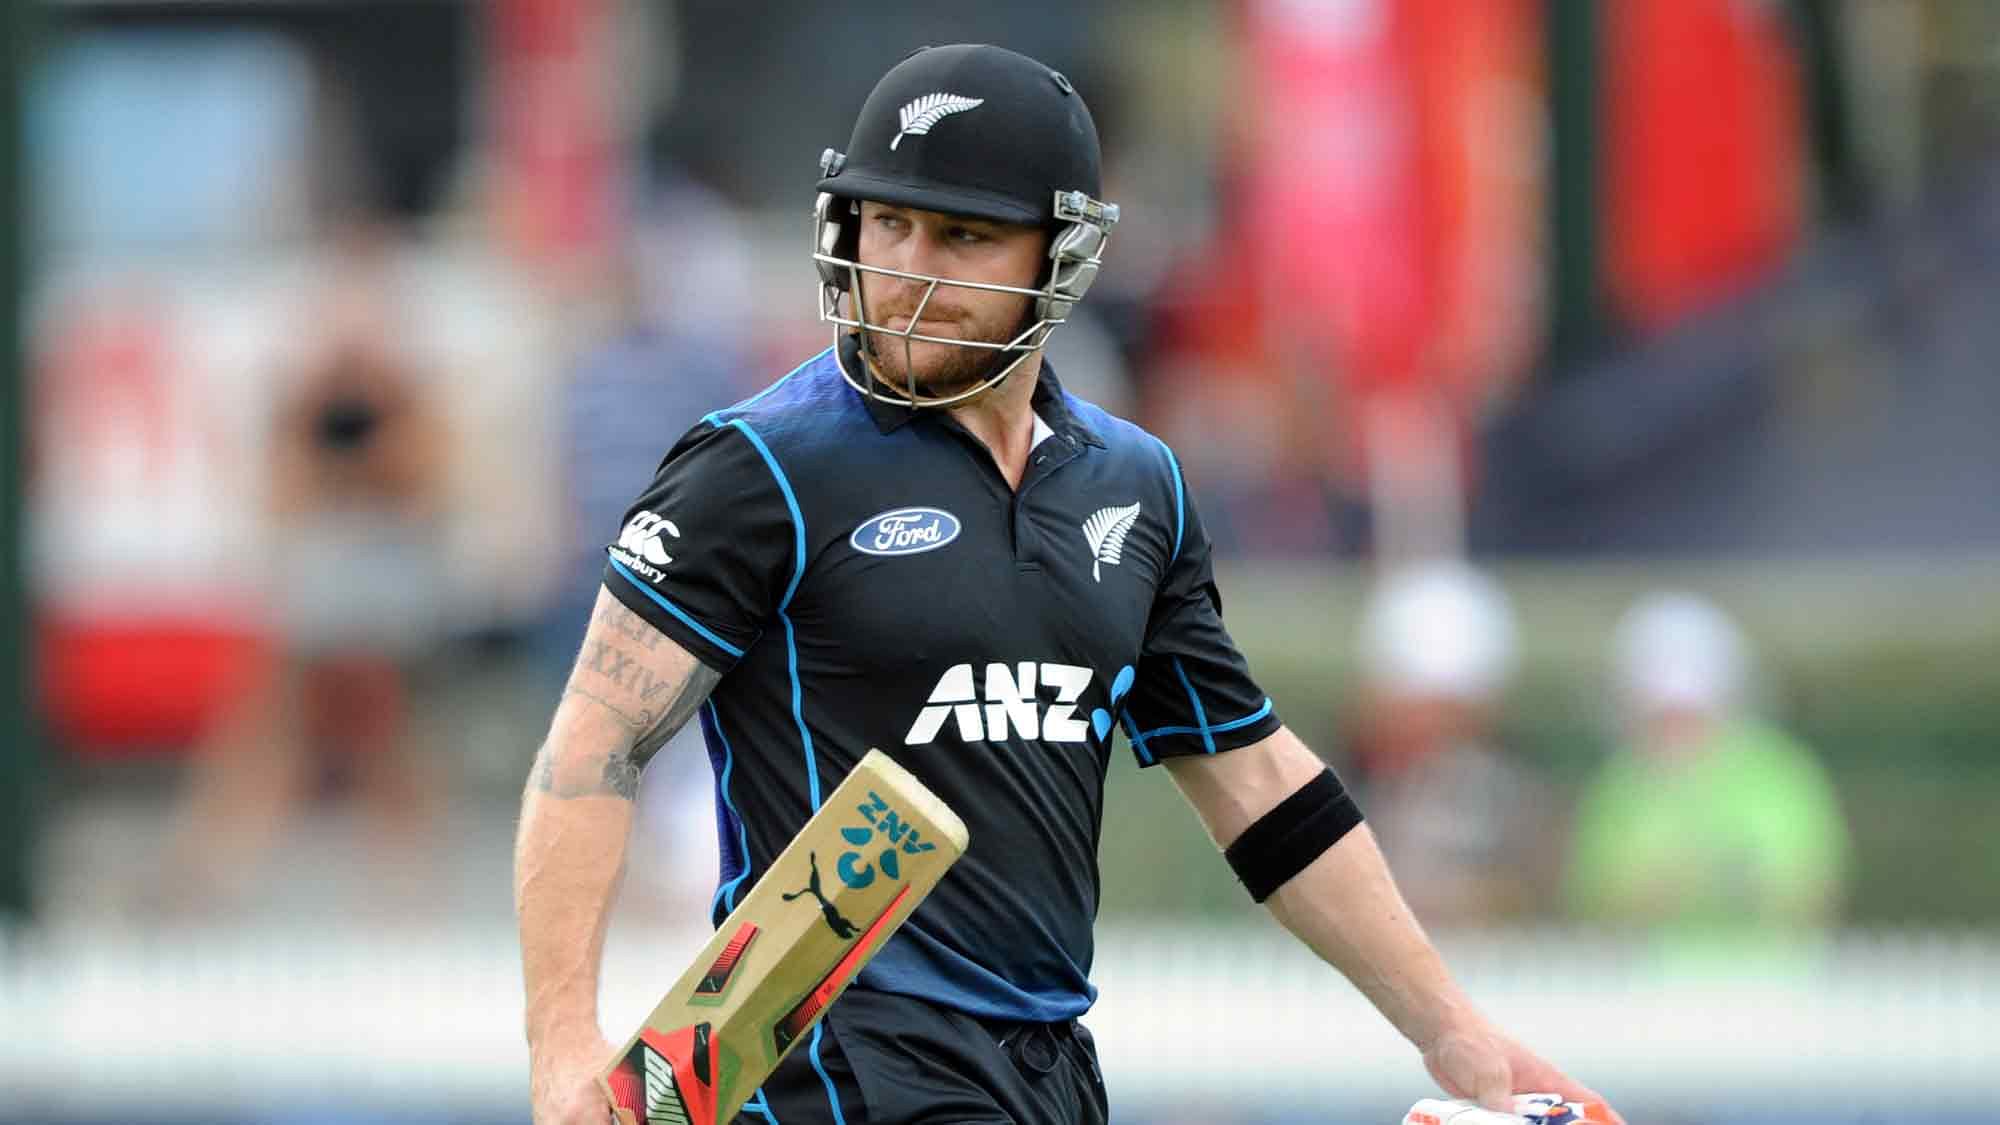 Former New Zealand captain Brendon McCullum has decided to retire from Big Bash League.